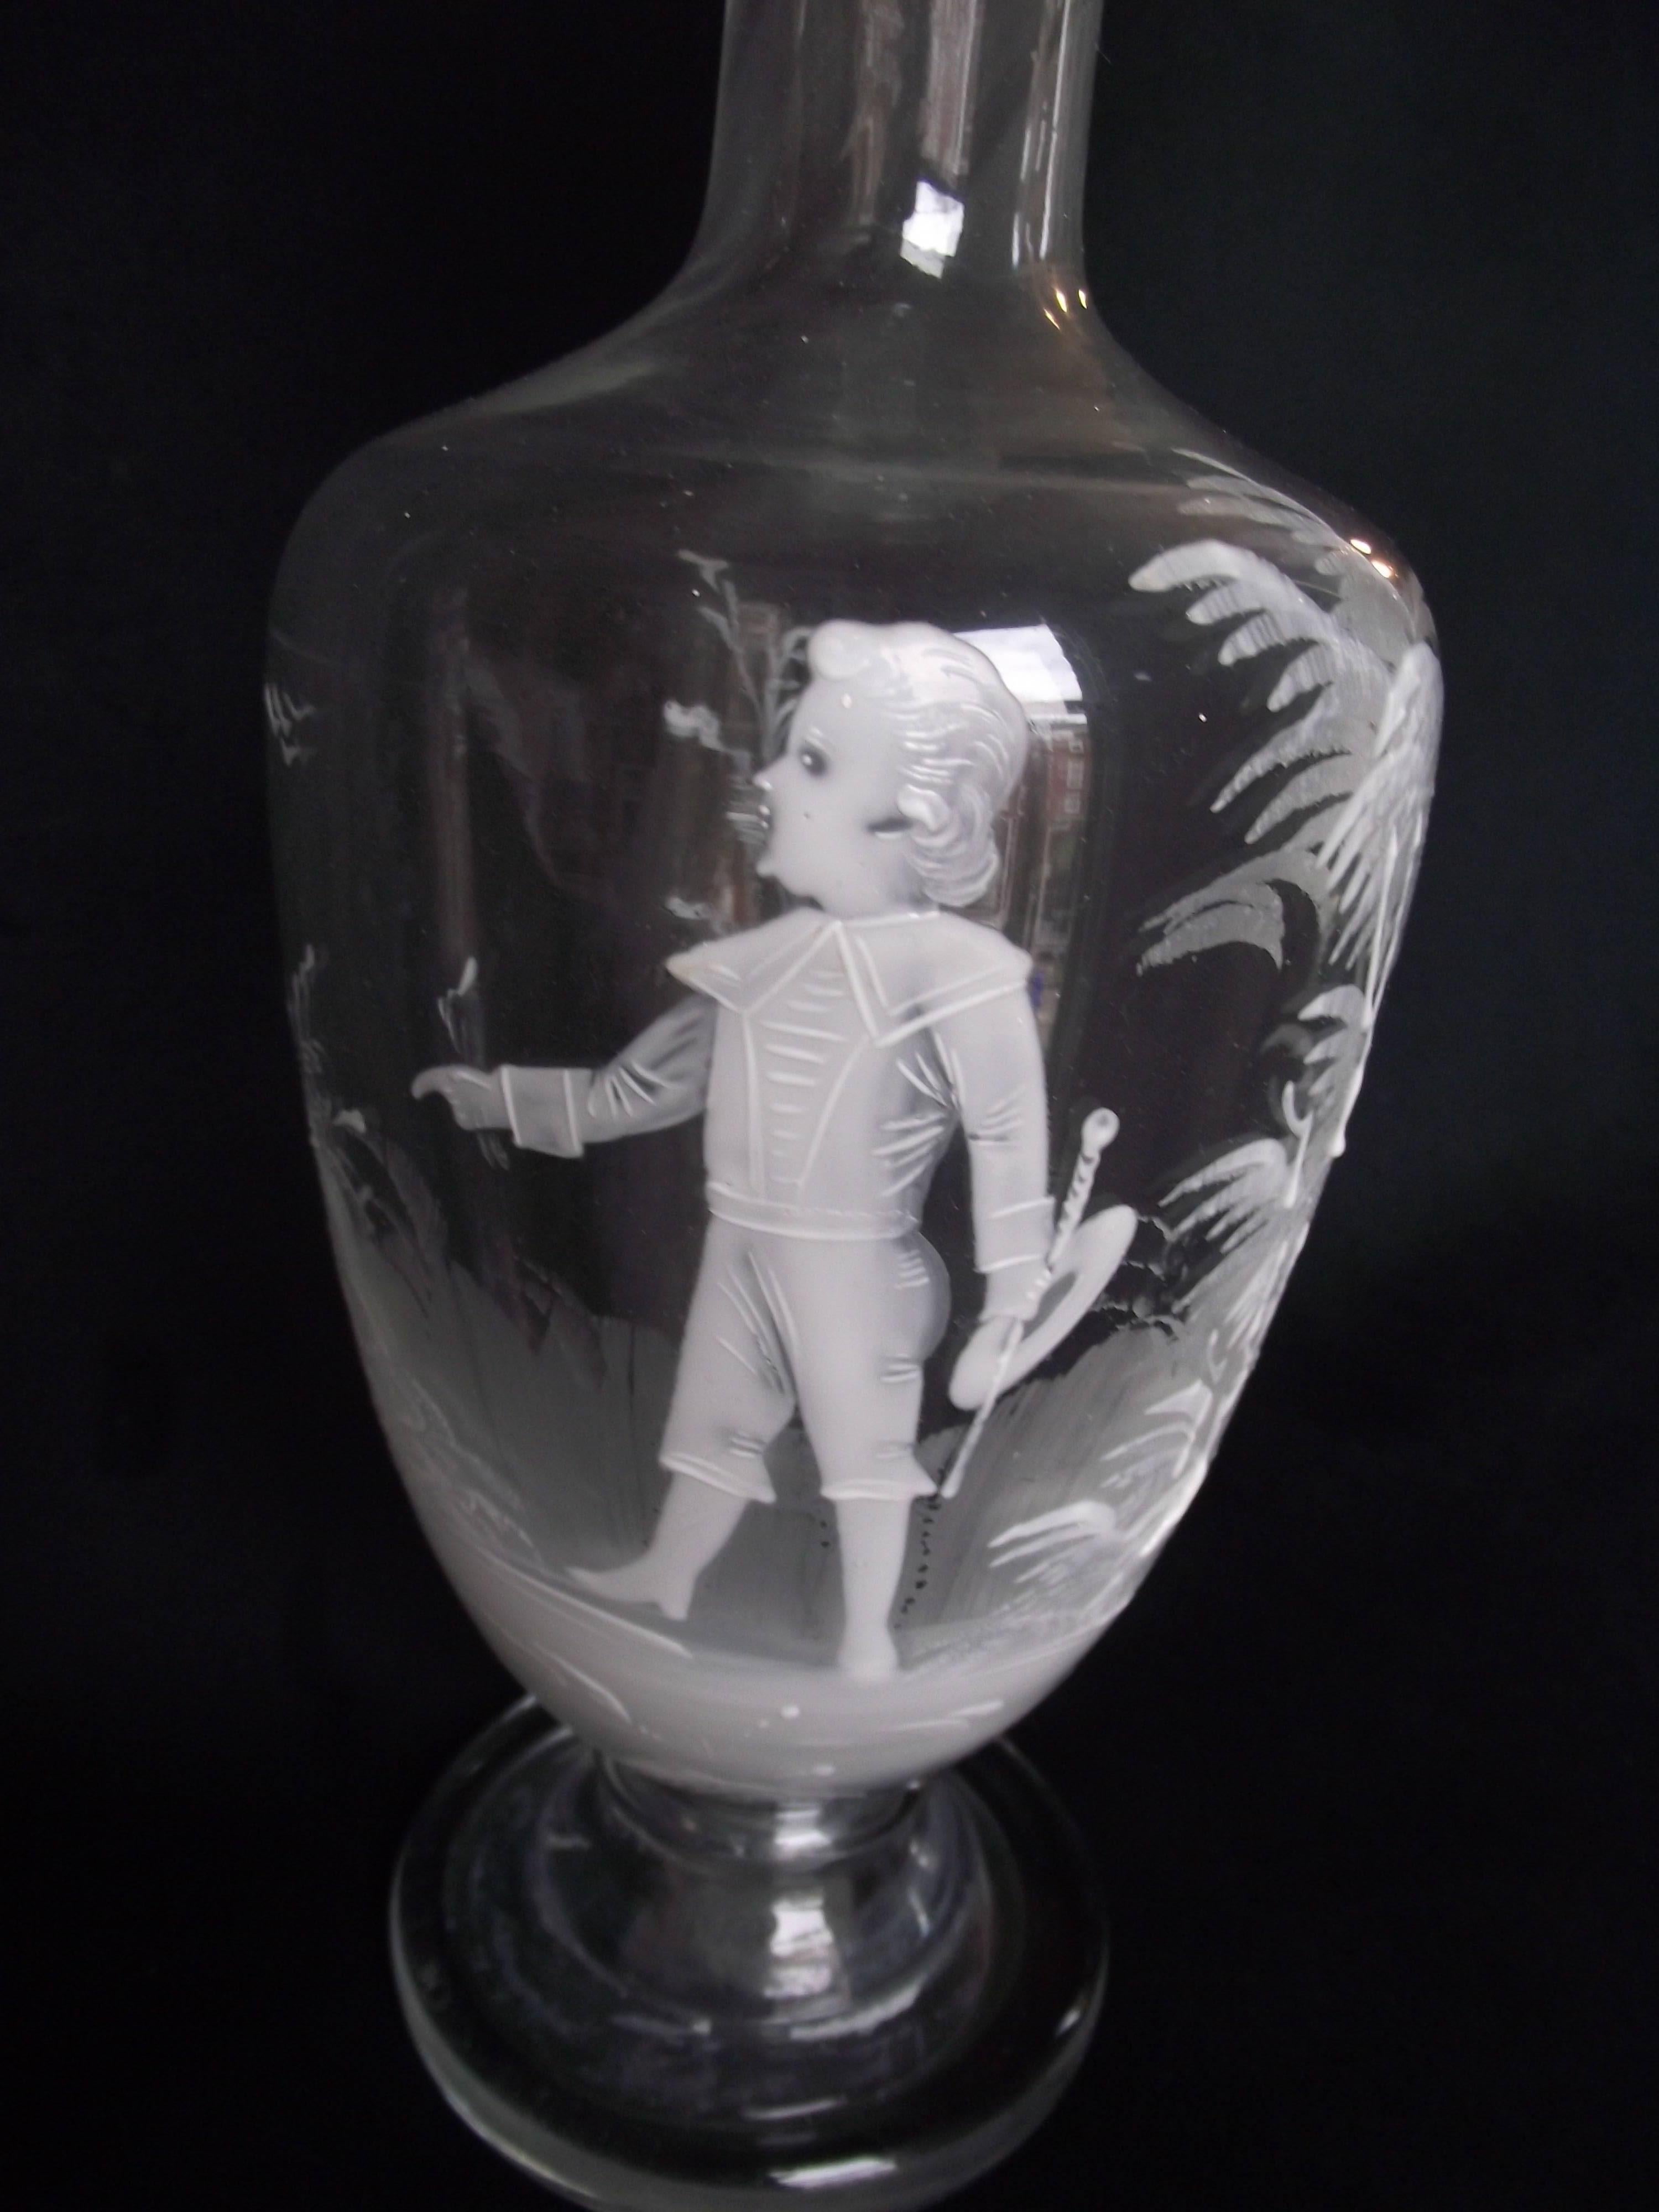 This mouth blown decanter is hand painted by Mary Gregory in white enamel. It features an intricate painting of a young boy holding a plant stem in one hand and his hat and stick in the other. The surroundings are tropical with palms and ferns,